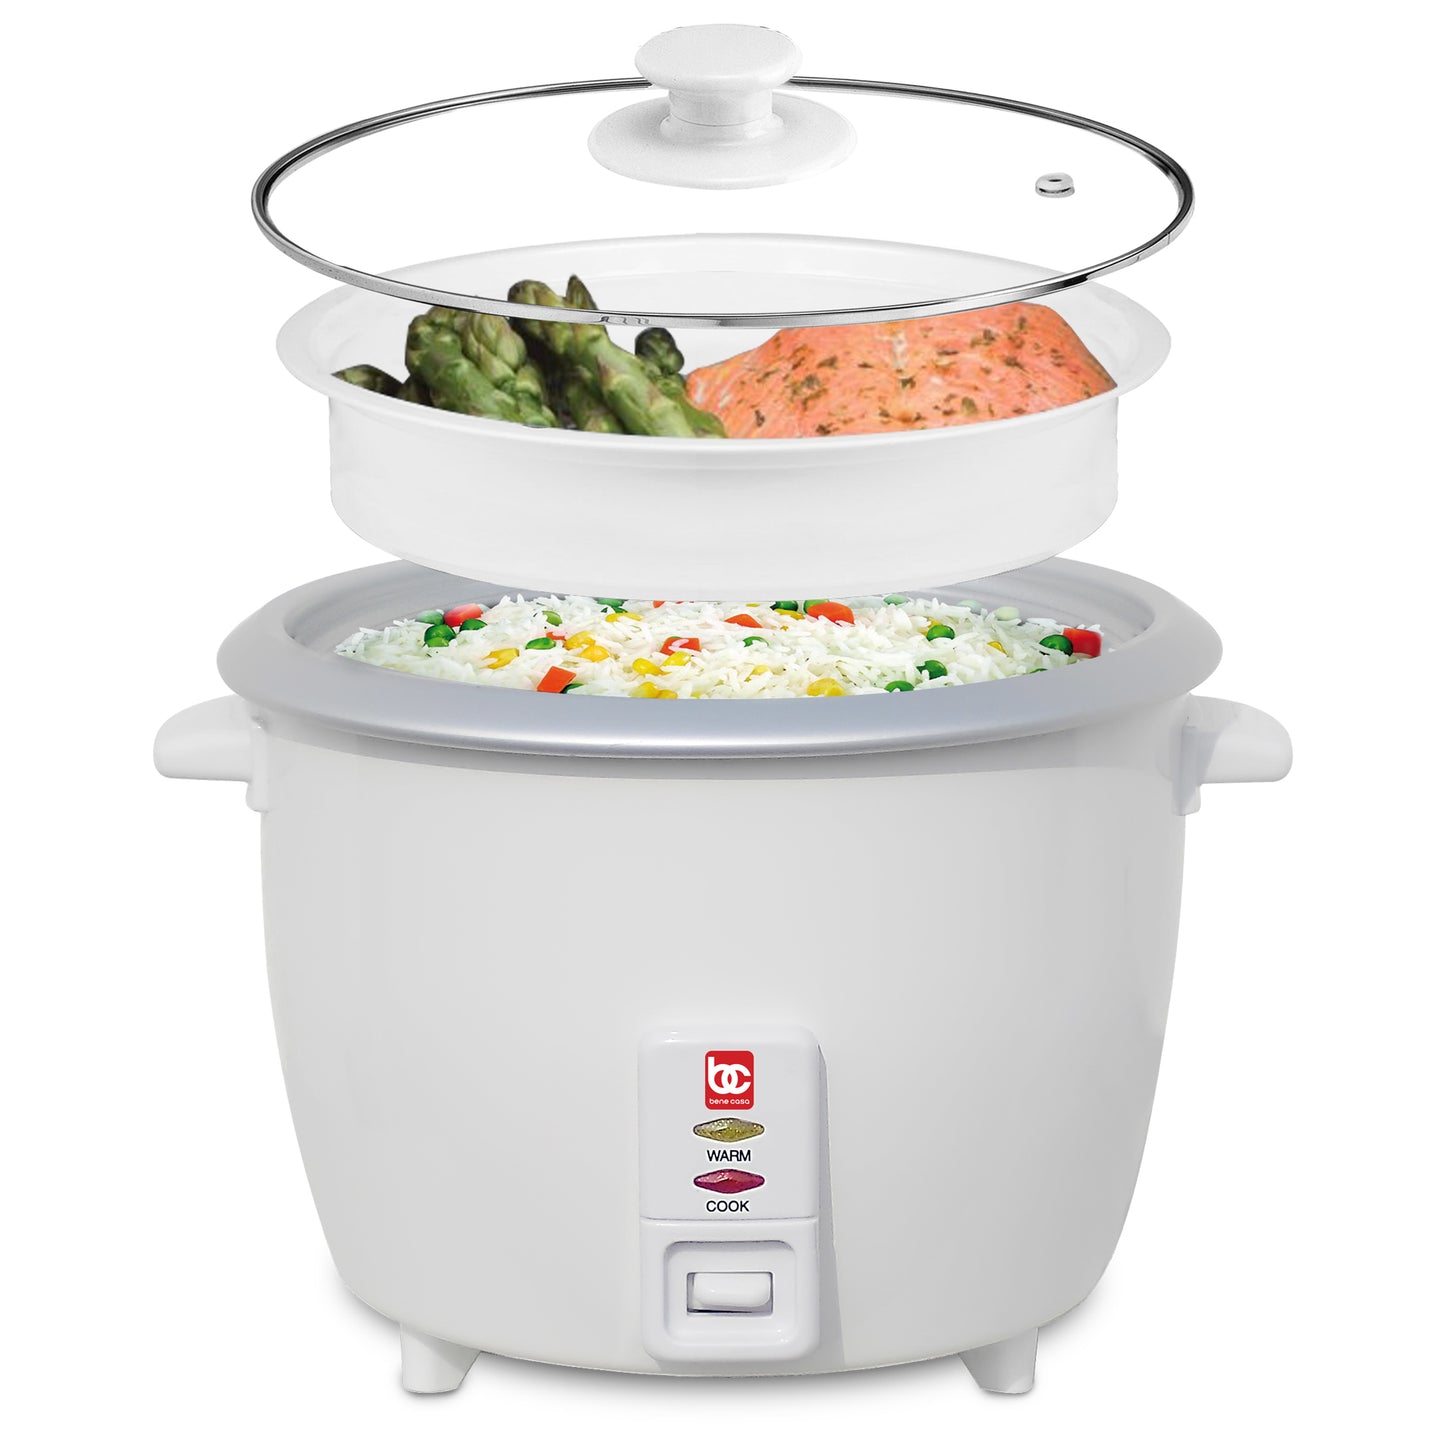 How To Use Rice Cooker As A Steamer